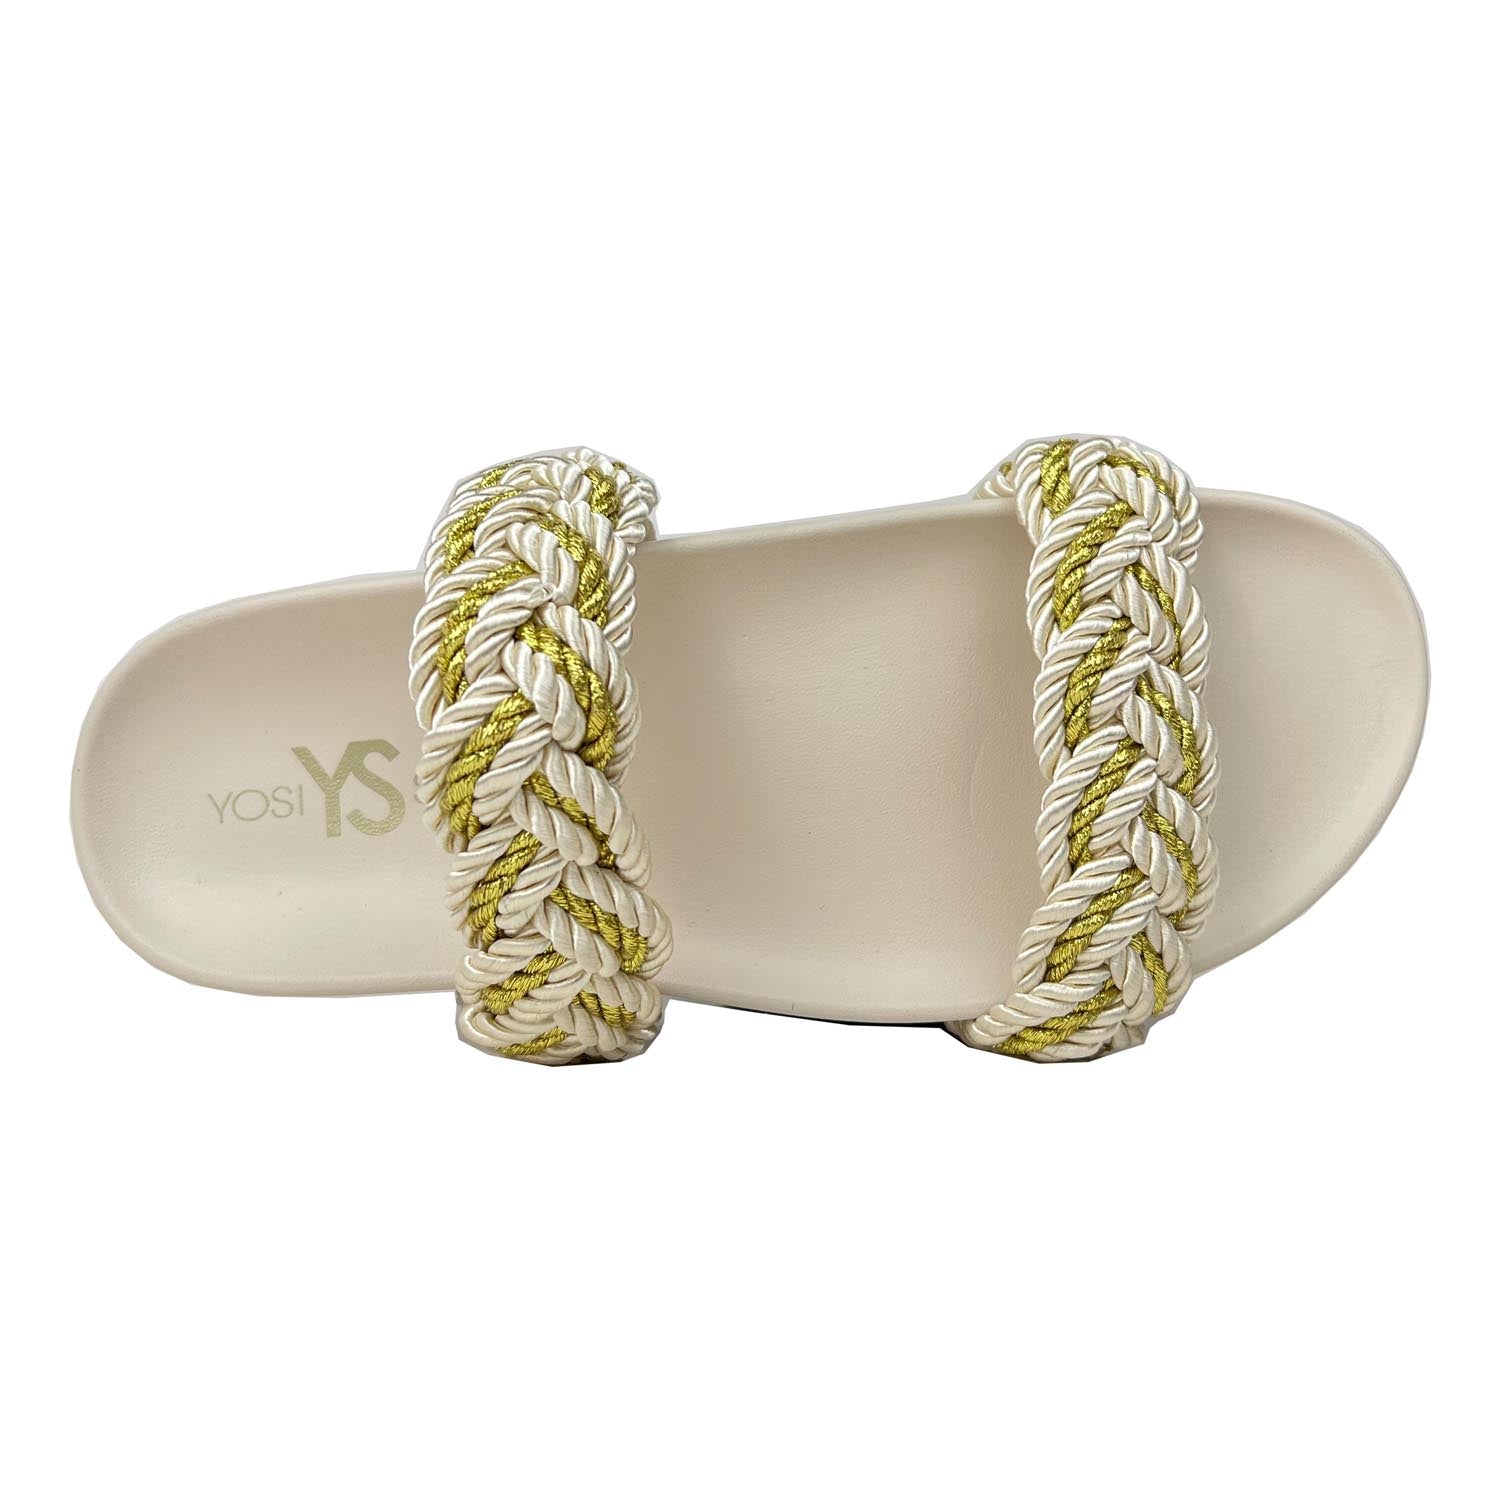 Michelle Braided Sandal in Gold